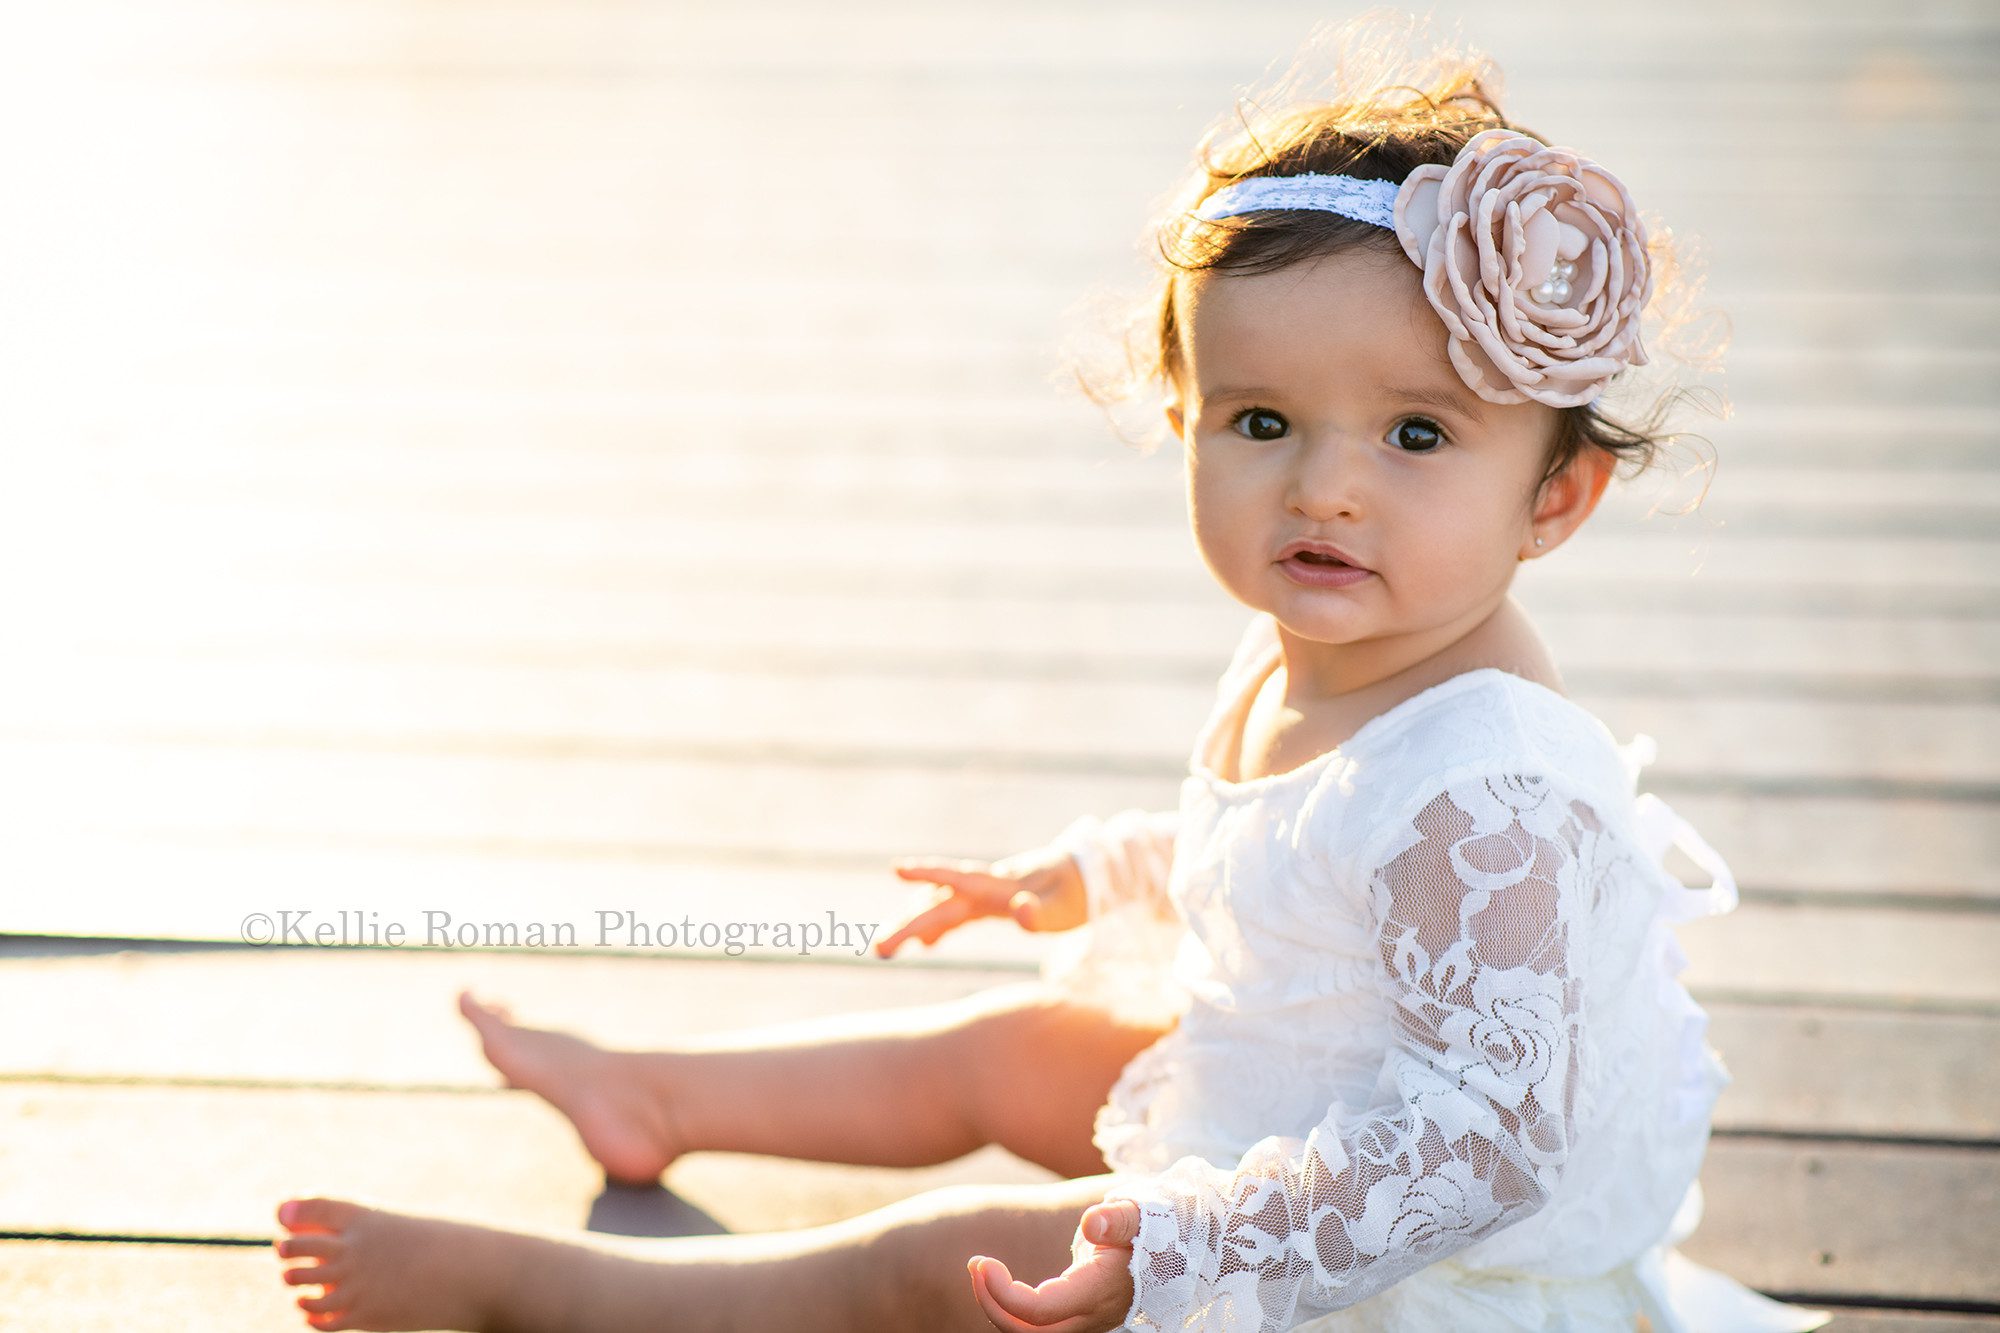 beach cake smash a one year old girl sitting on a wood walk way with the sun shining behind her she is looking into the lens of the camera and is wearing a lace ivory romper with a pink headband